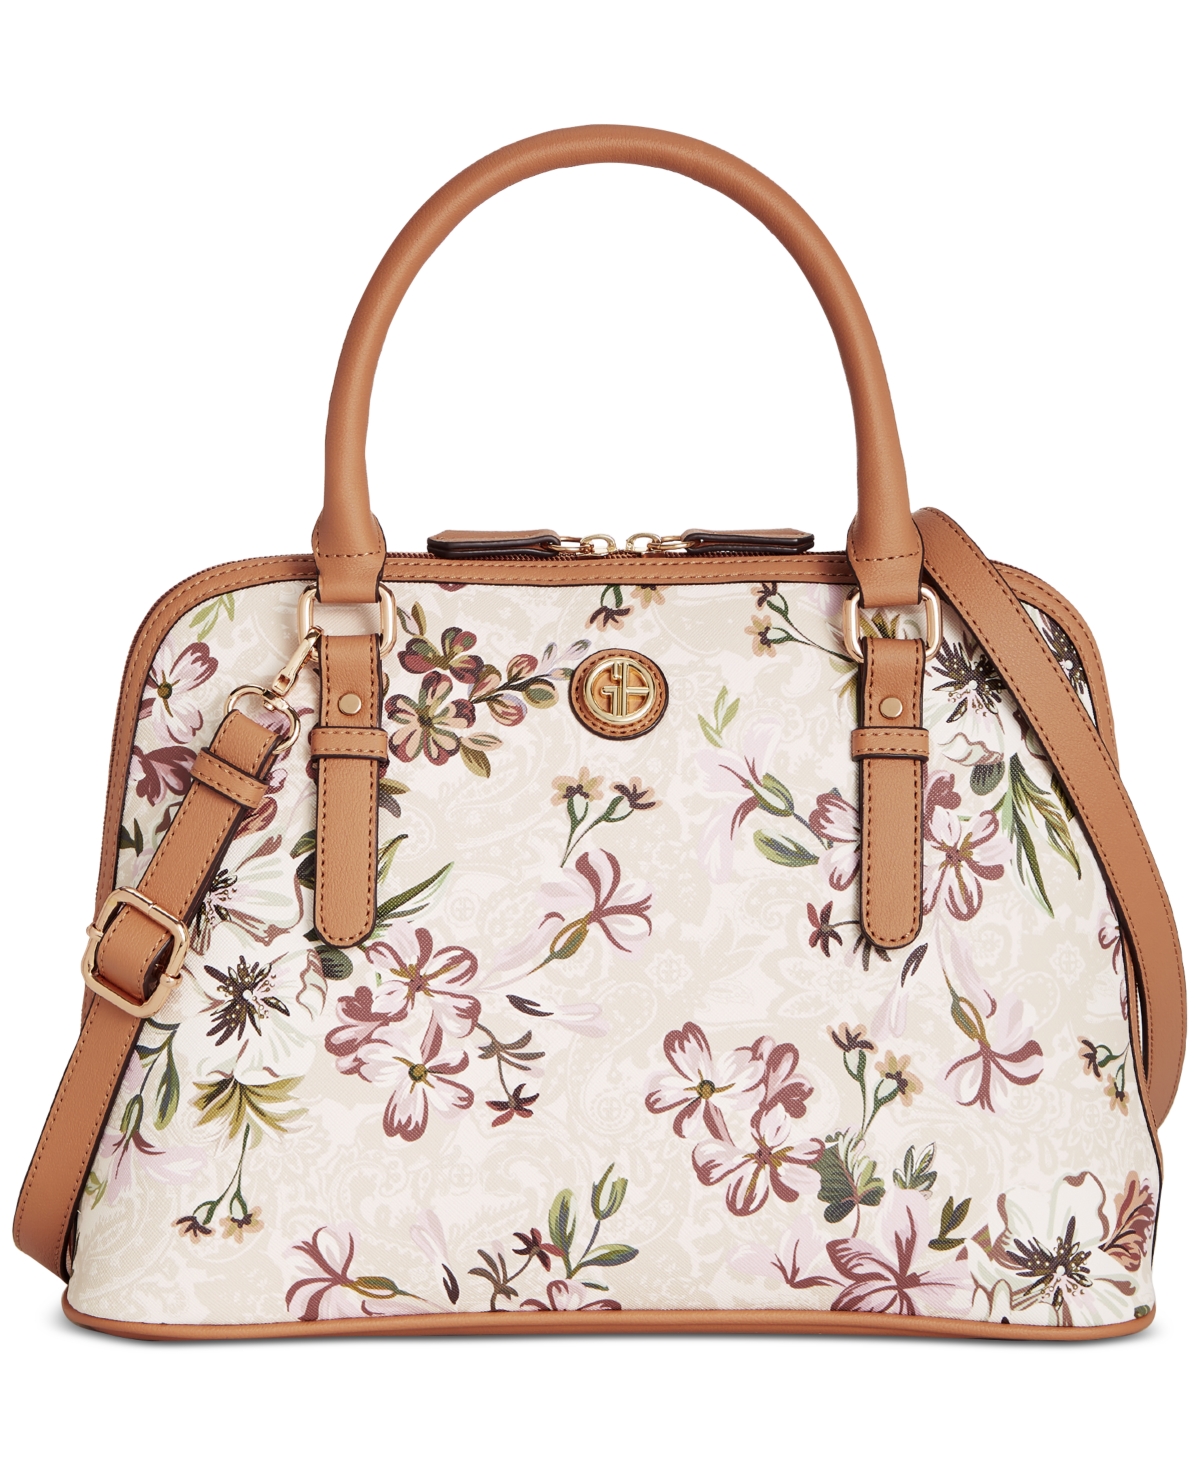 Giani Bernini Floral Dome Satchel, Created For Macy's In Neutral Floral